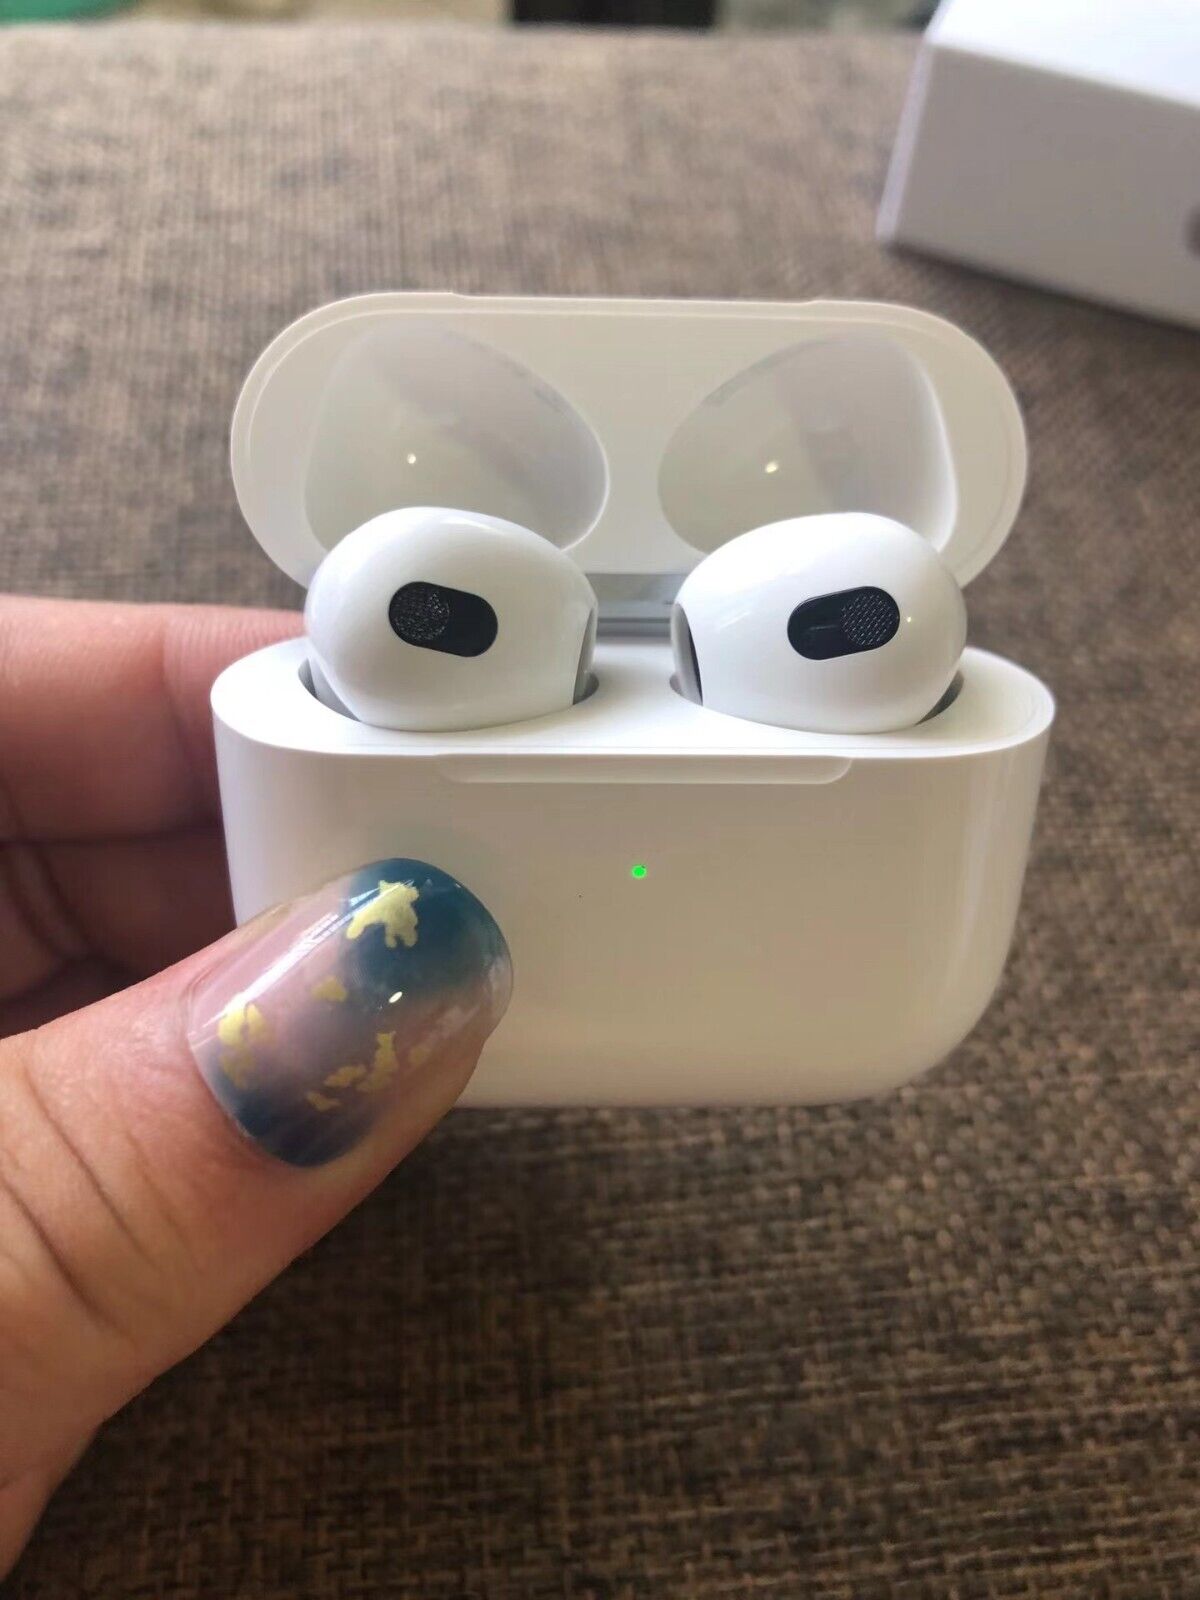 NEW SEALED APPLE AIRPODS (3rd Generation) with MagSafe Charging Case🔥 iOS